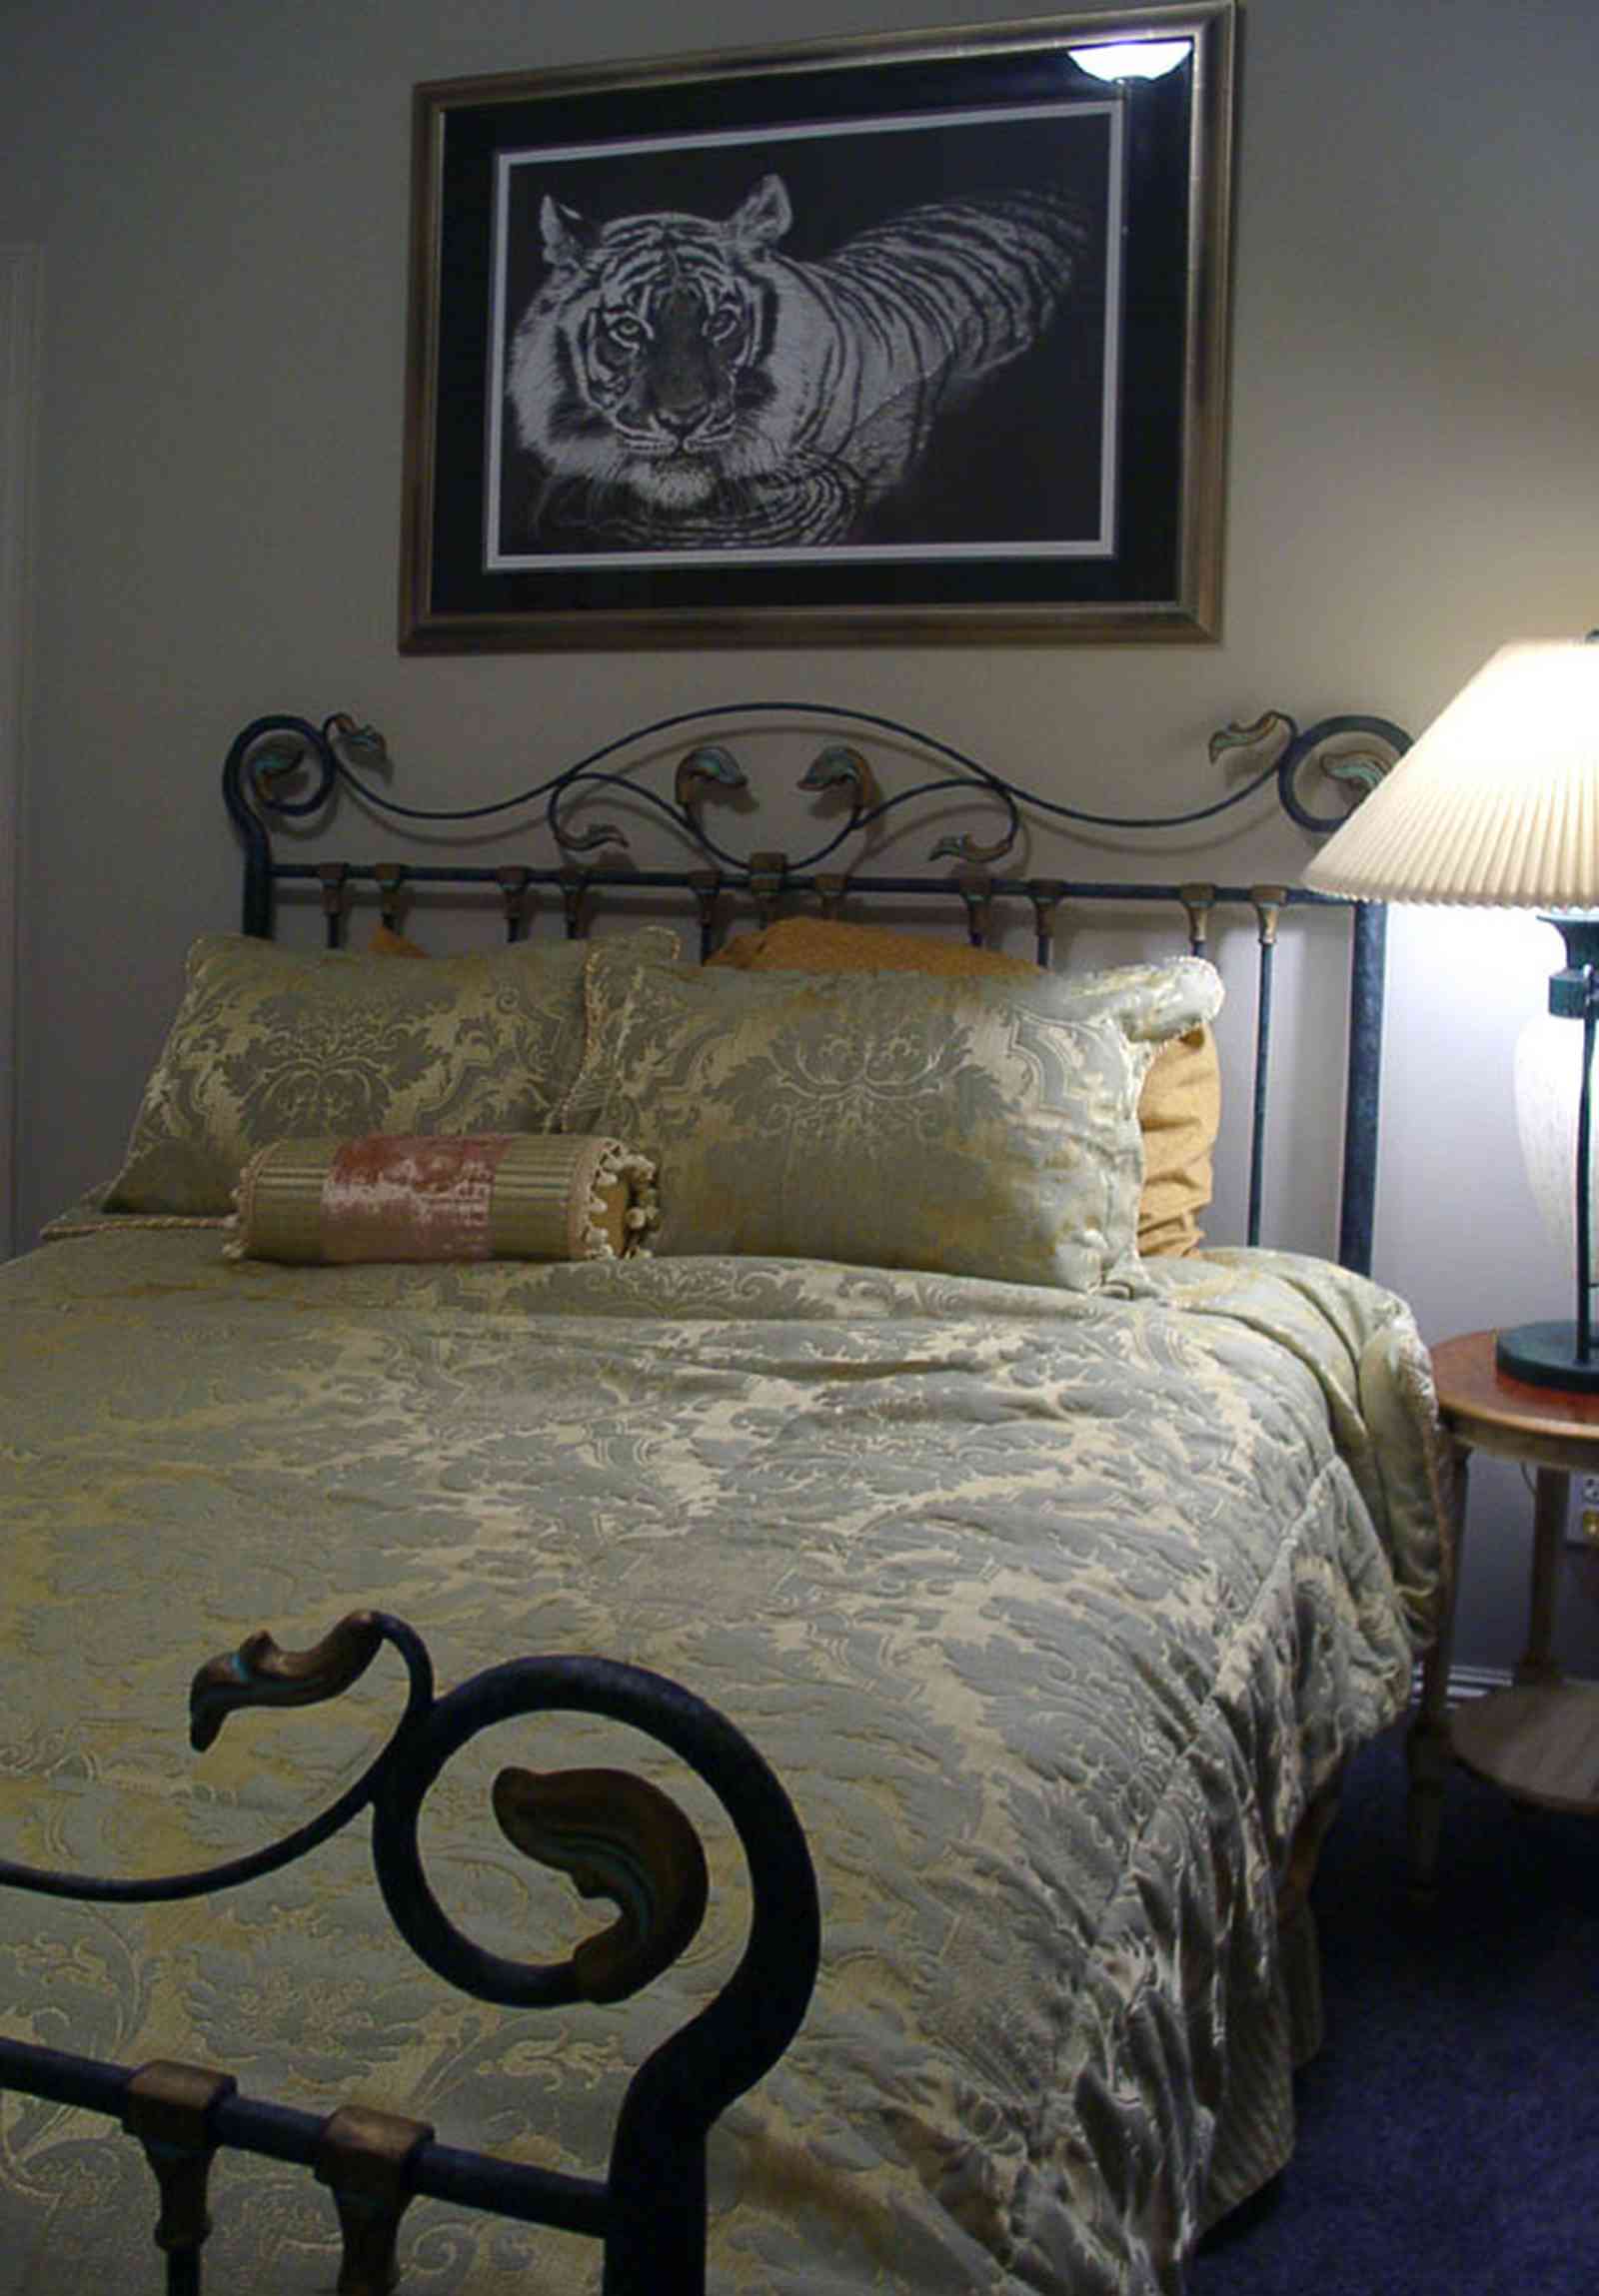 Aragon:-591-Aragon-Street_26.jpg:  wrought-iron bed, tiger painting, dee dee ritchie